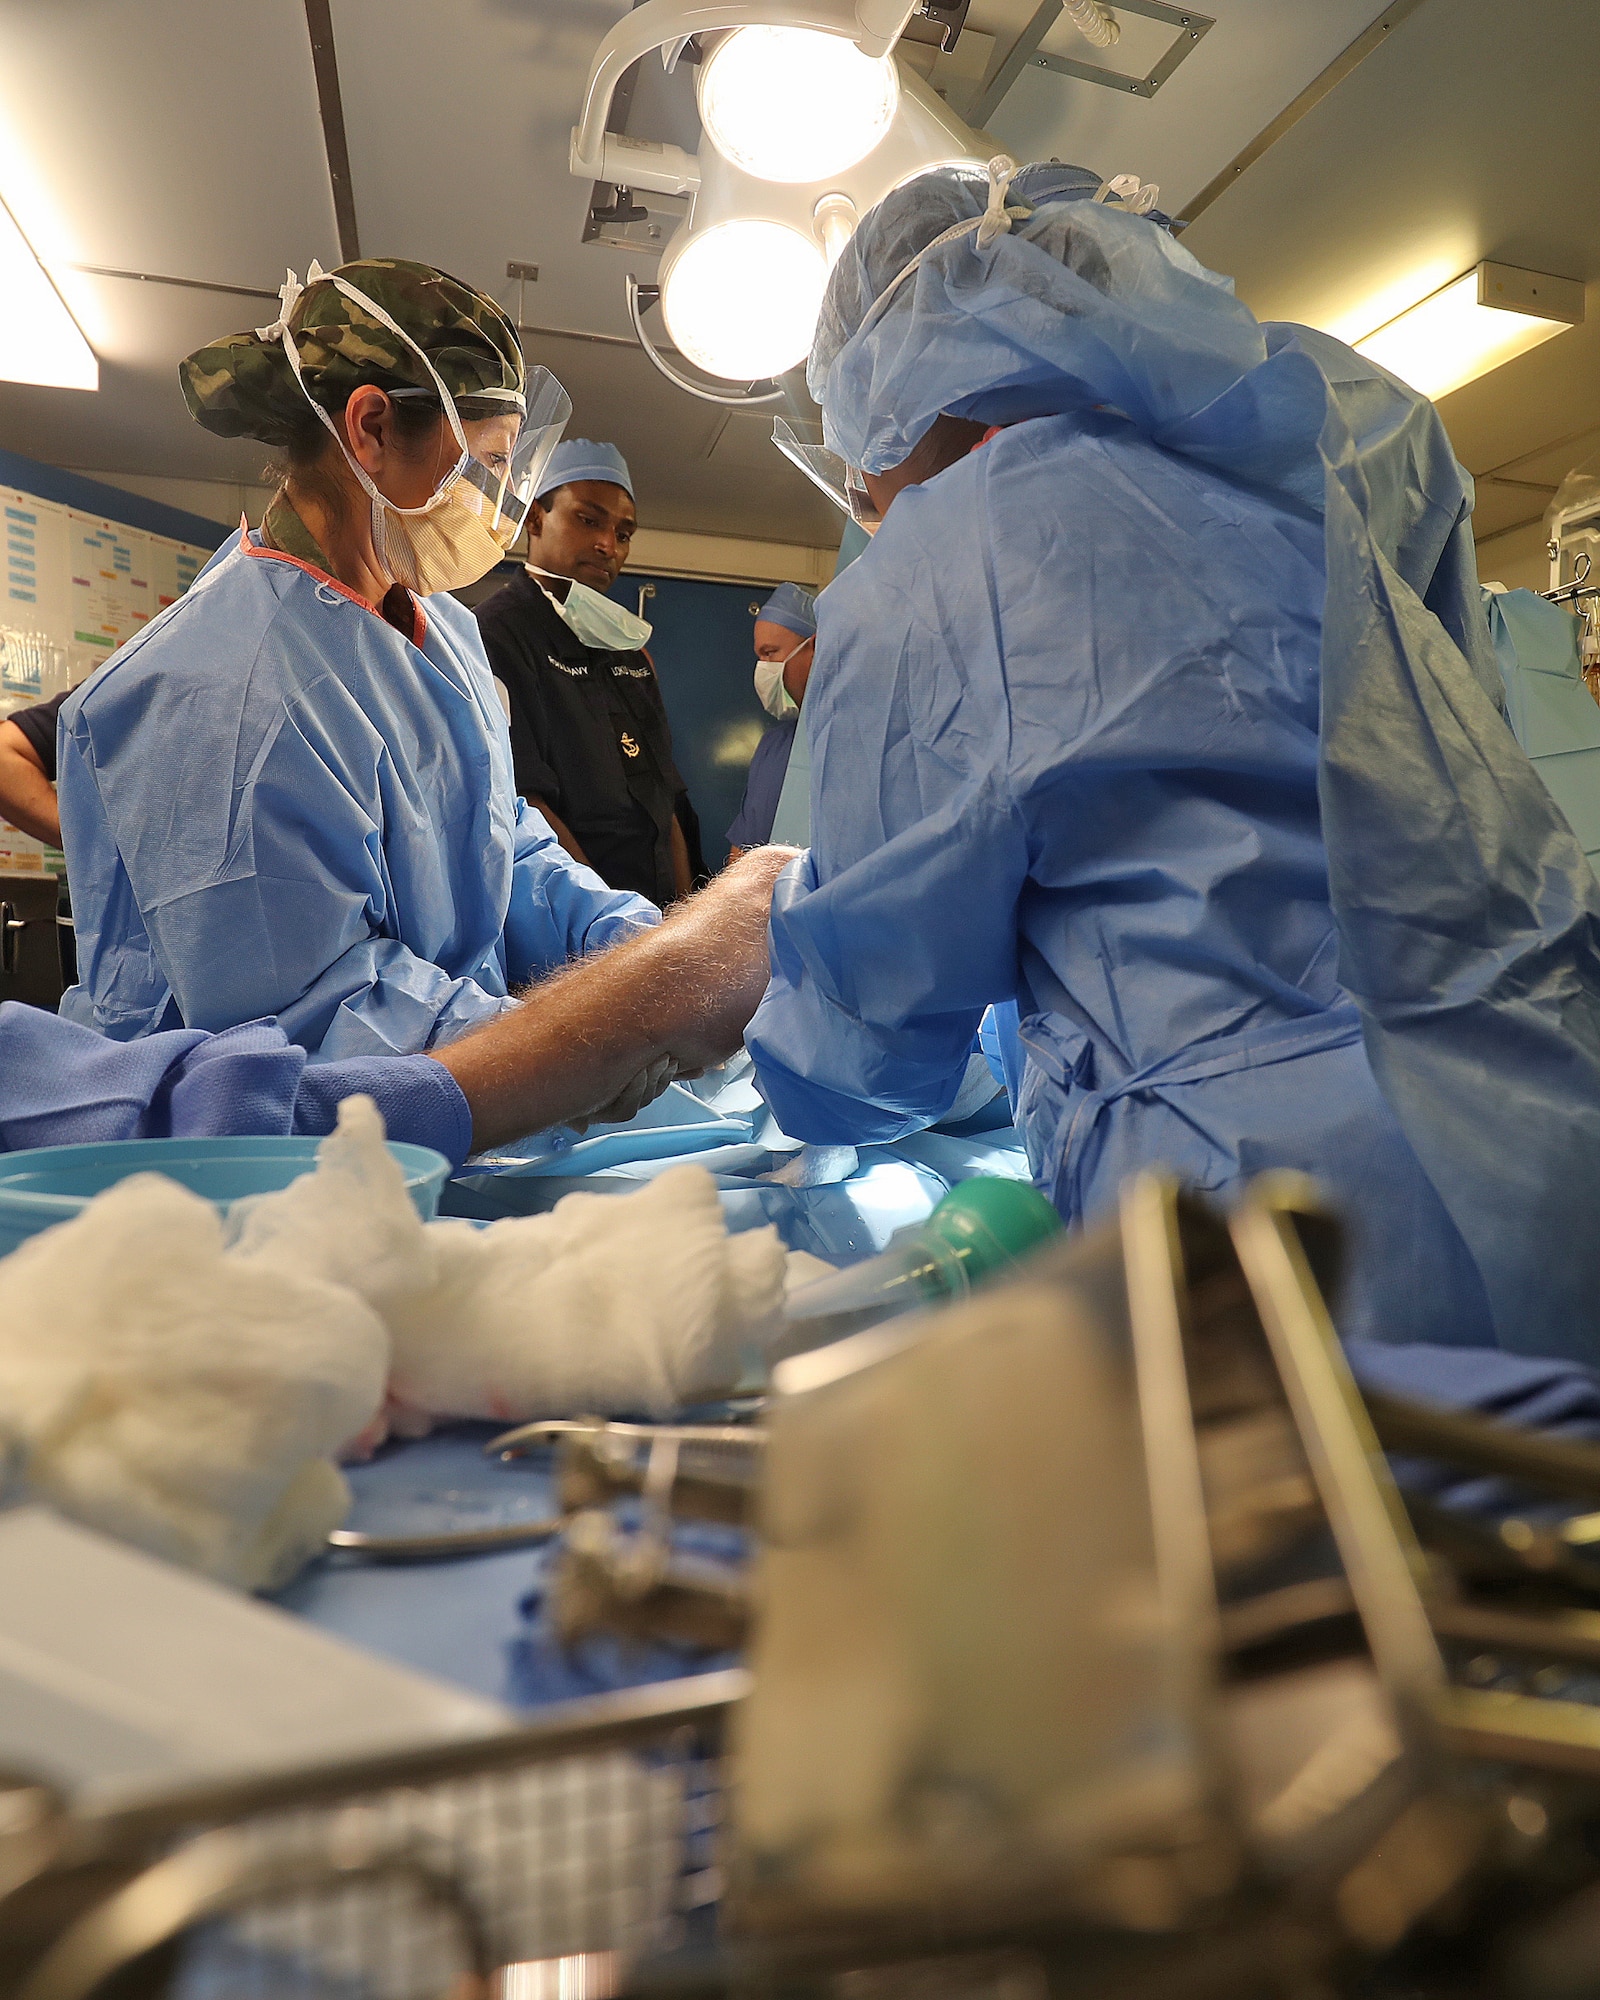 A combined Royal Navy and U.S. Air Force surgical team conduct a simulated operation to save a Royal Marine’s leg following an exercise gunshot wound, Jan. 26, 2017. The 379th Expeditionary Medical Operations Squadron mobile field surgical and critical care teams participated in exercise Azraq Serpent, where they worked with Royal Navy forces onboard the HMS Ocean. (Courtesy photo, Royal Navy)